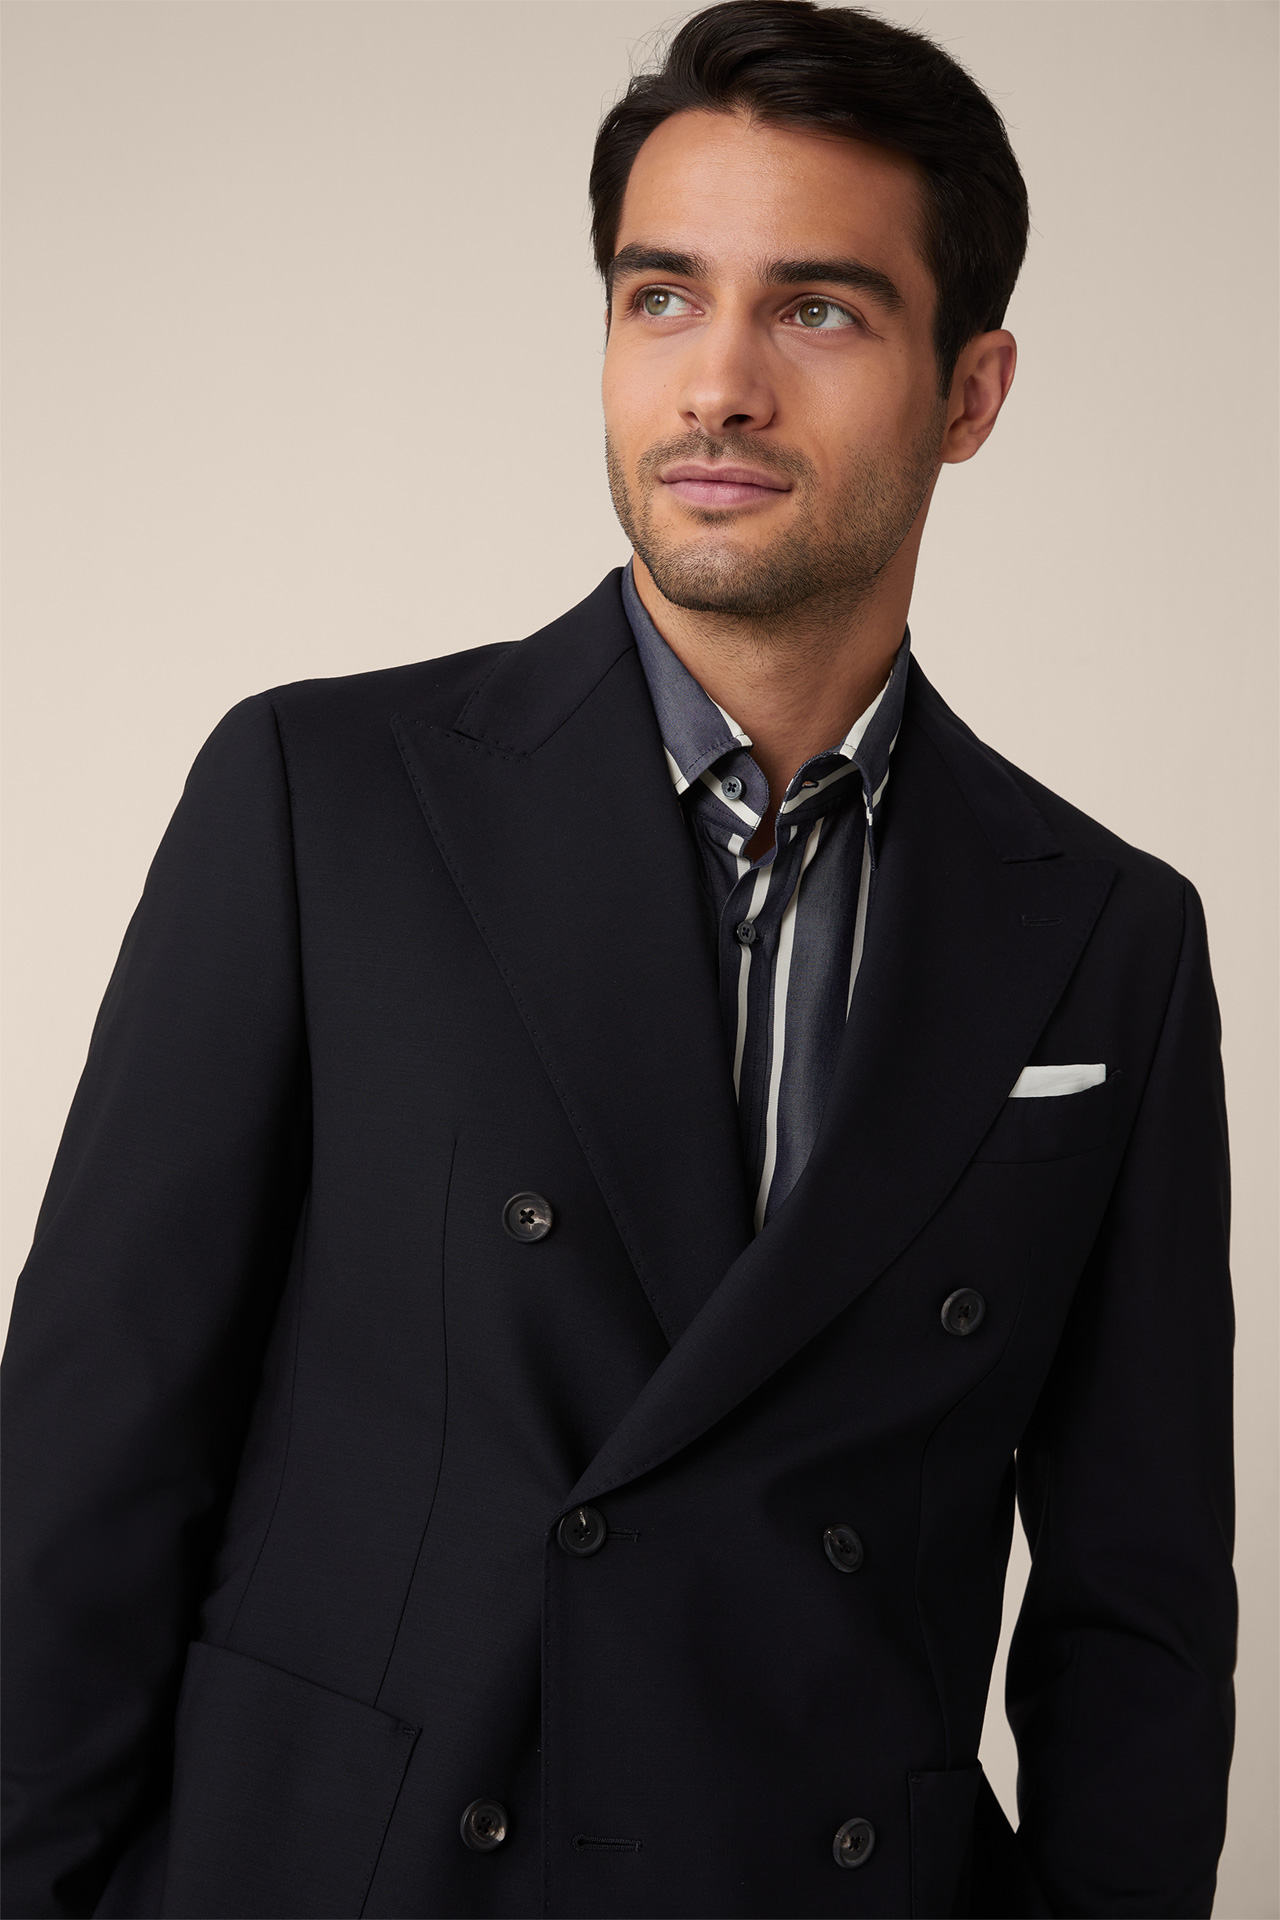 Sation Double-Breasted Modular Jacket in Navy